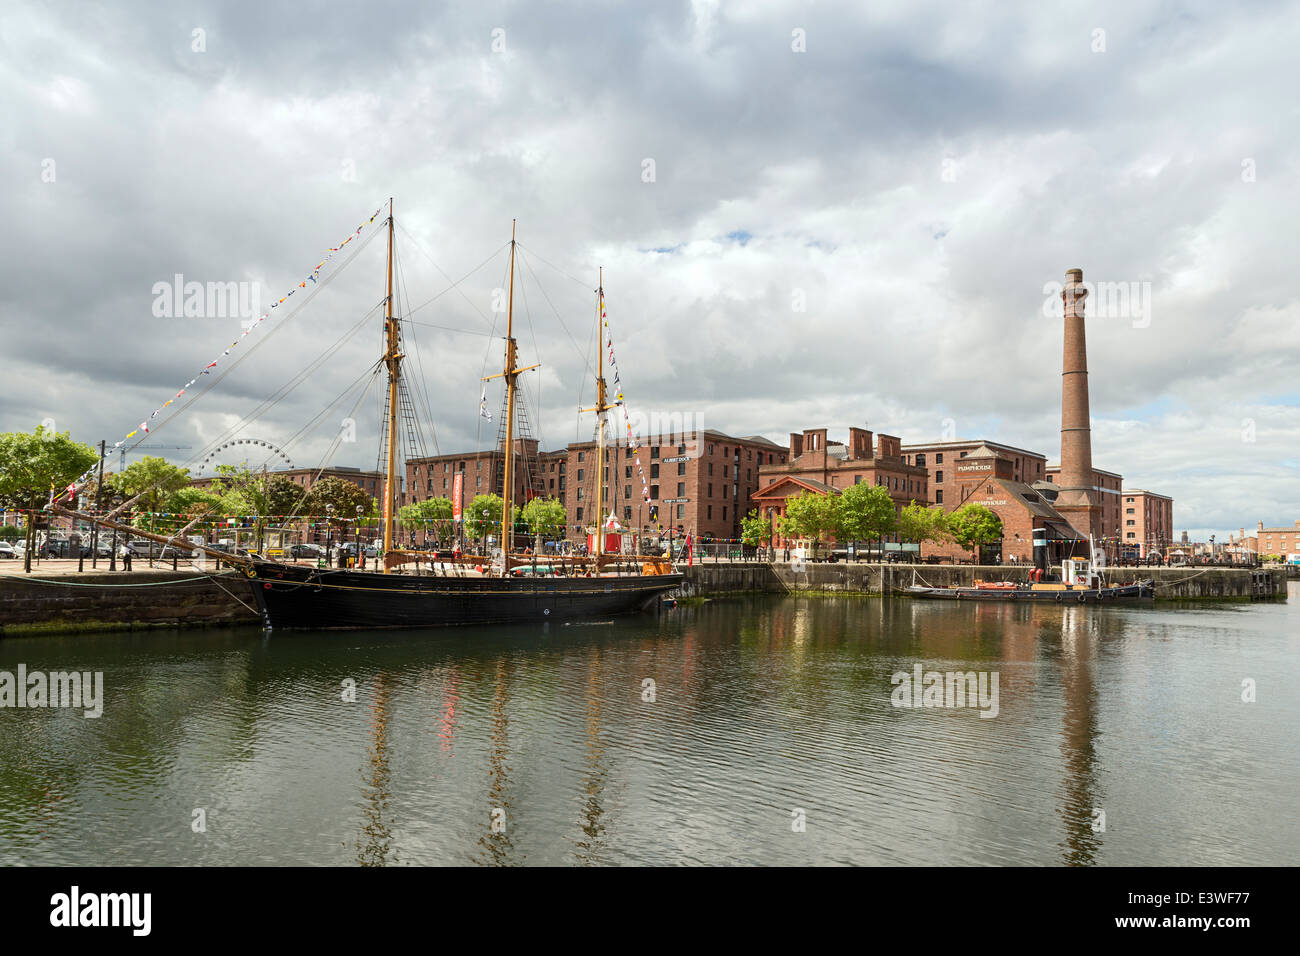 Sailboat docked near the Dock's former pump house, Liverpool England. Stock Photo